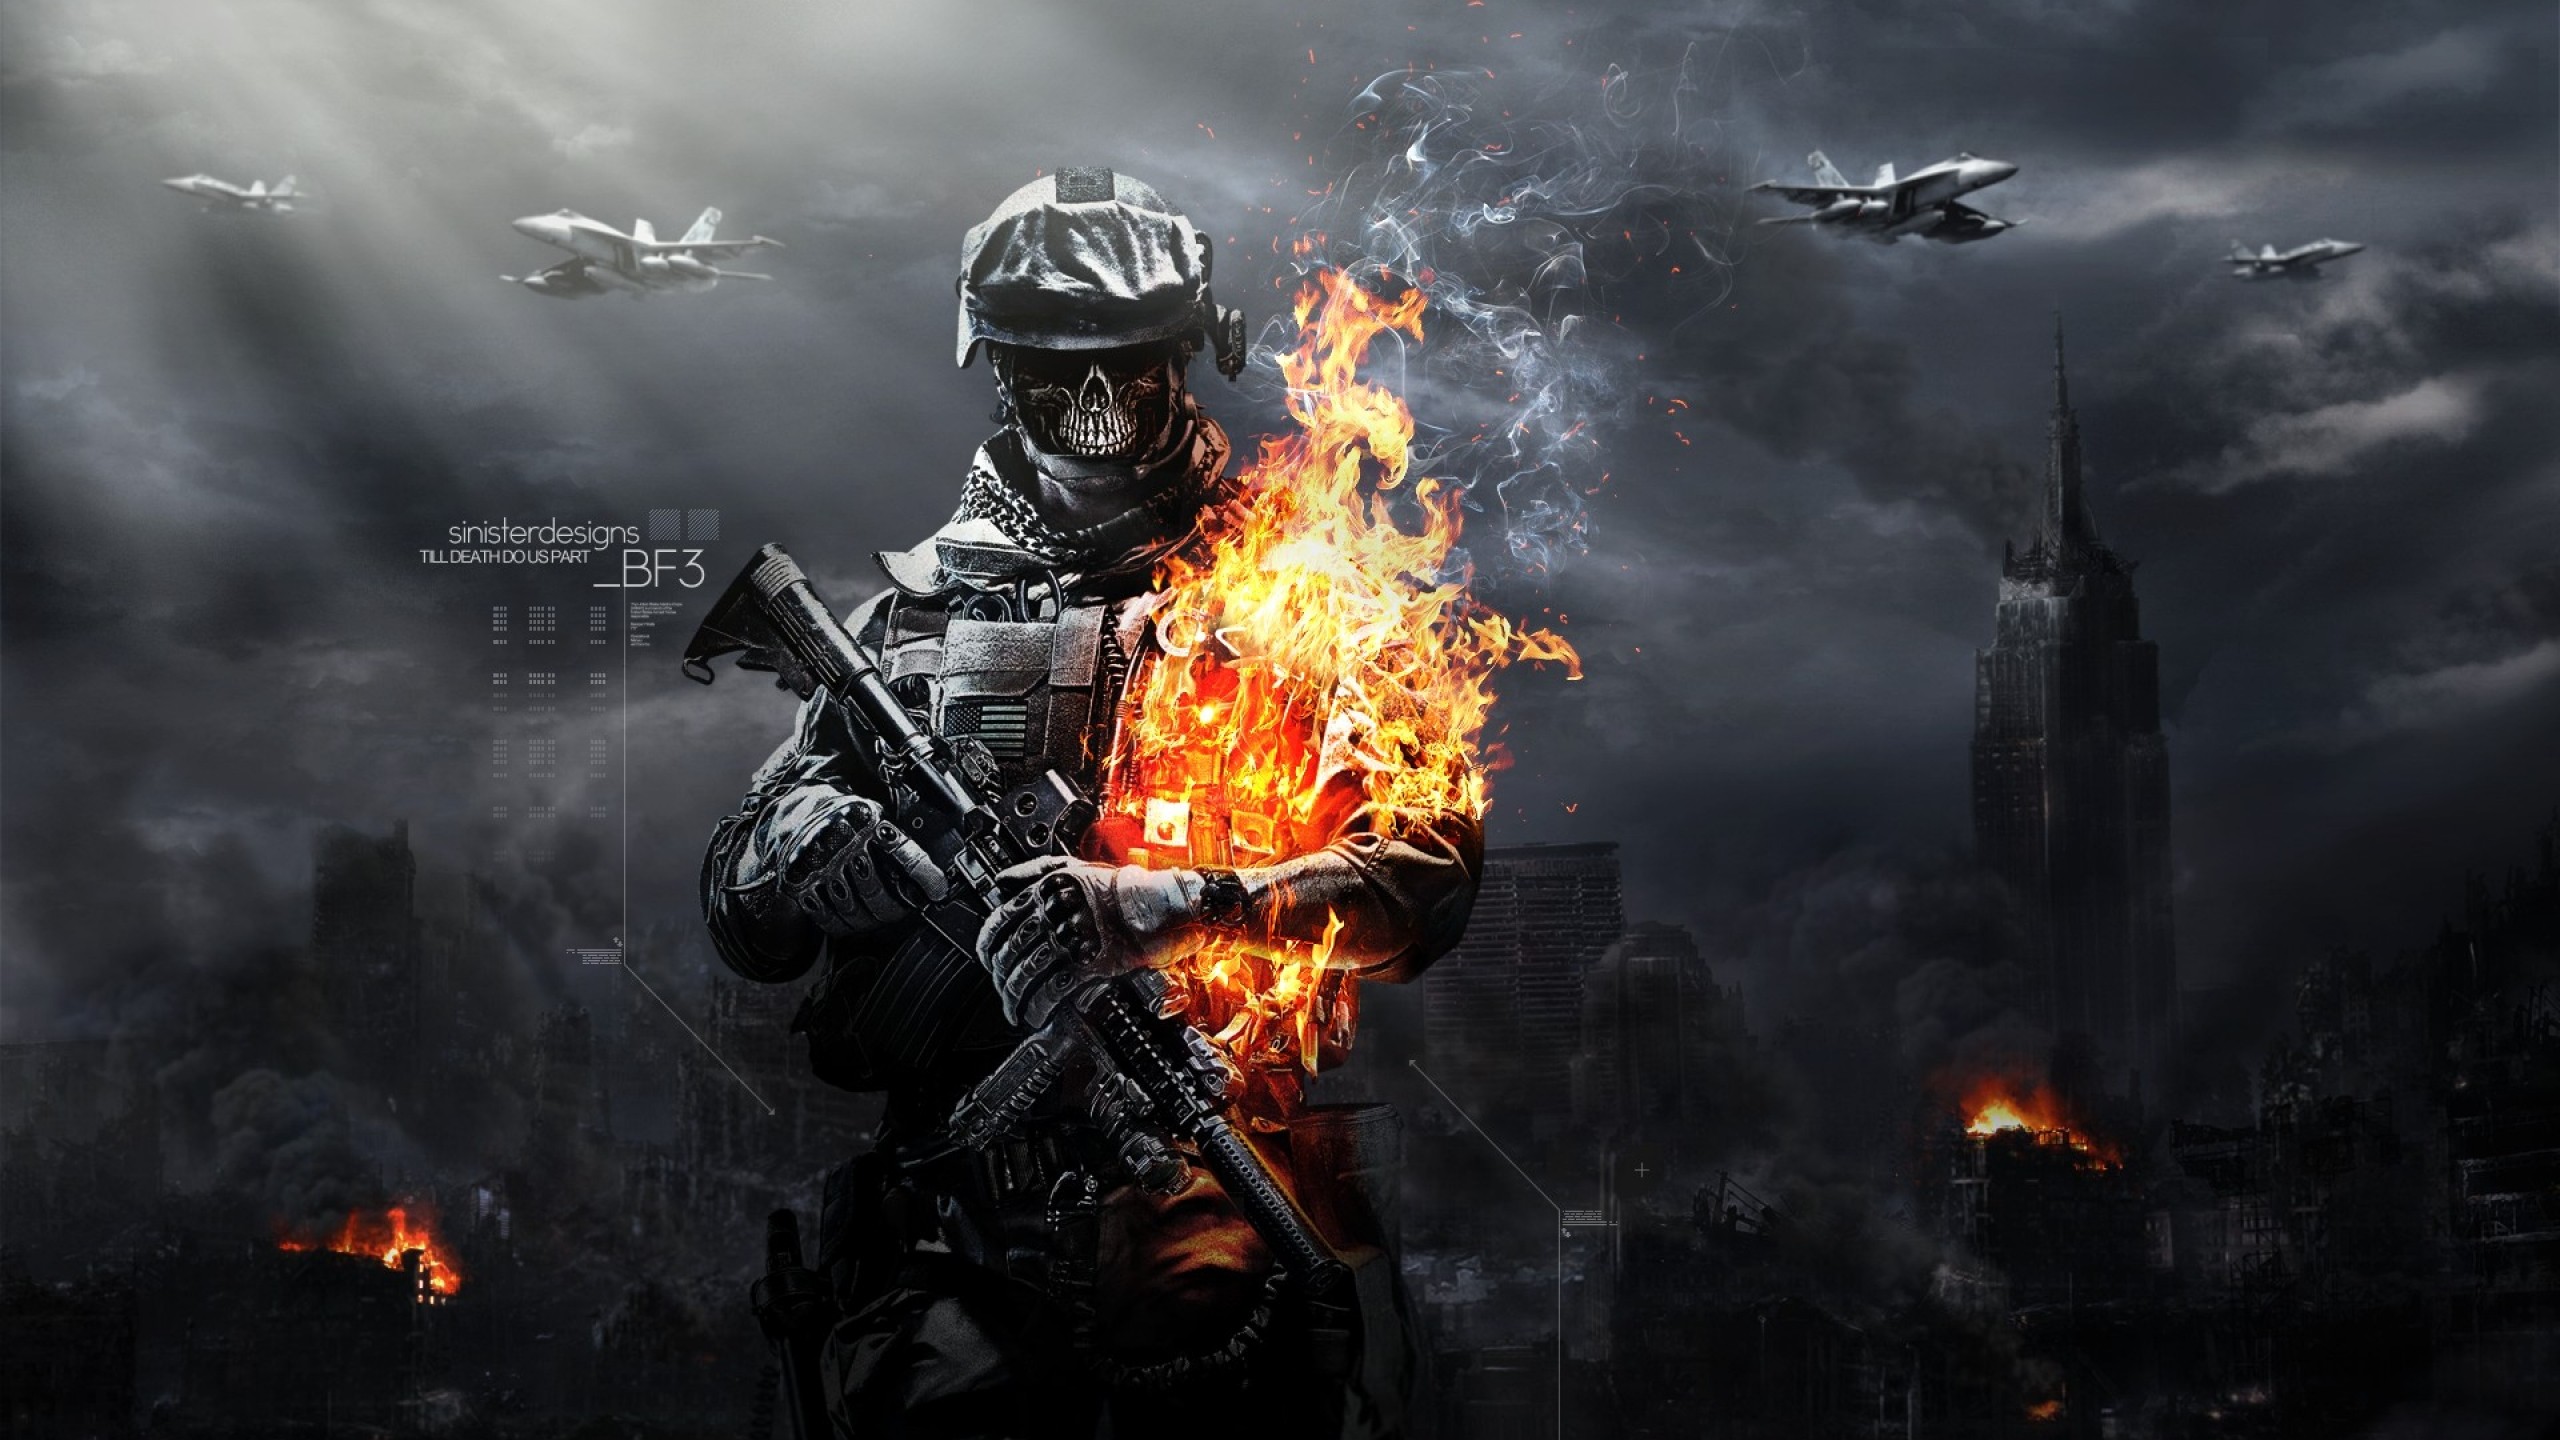 General 2560x1440 Battlefield (game) video games jets Battlefield 3 weapon video game art fire PC gaming